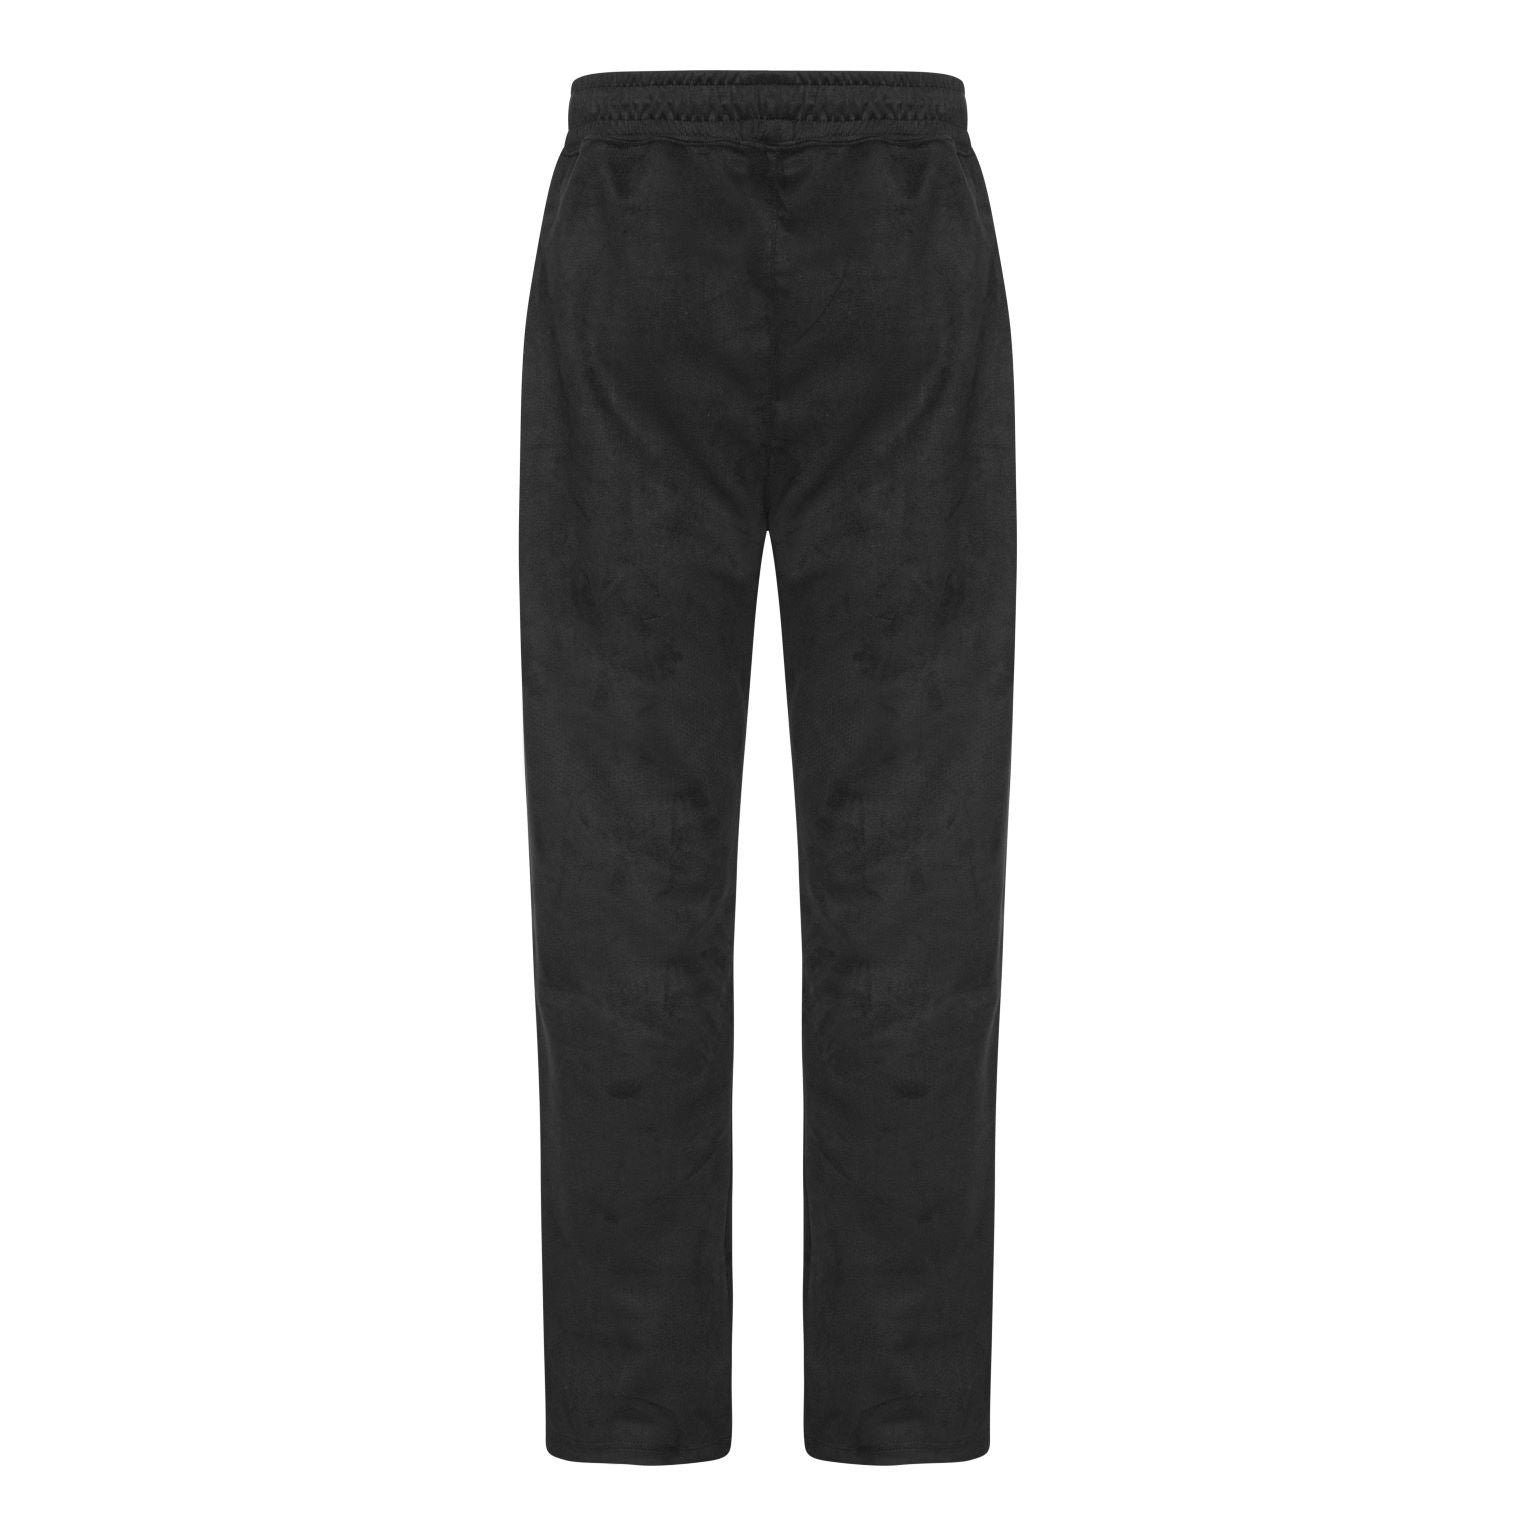 Imitation suede trousers